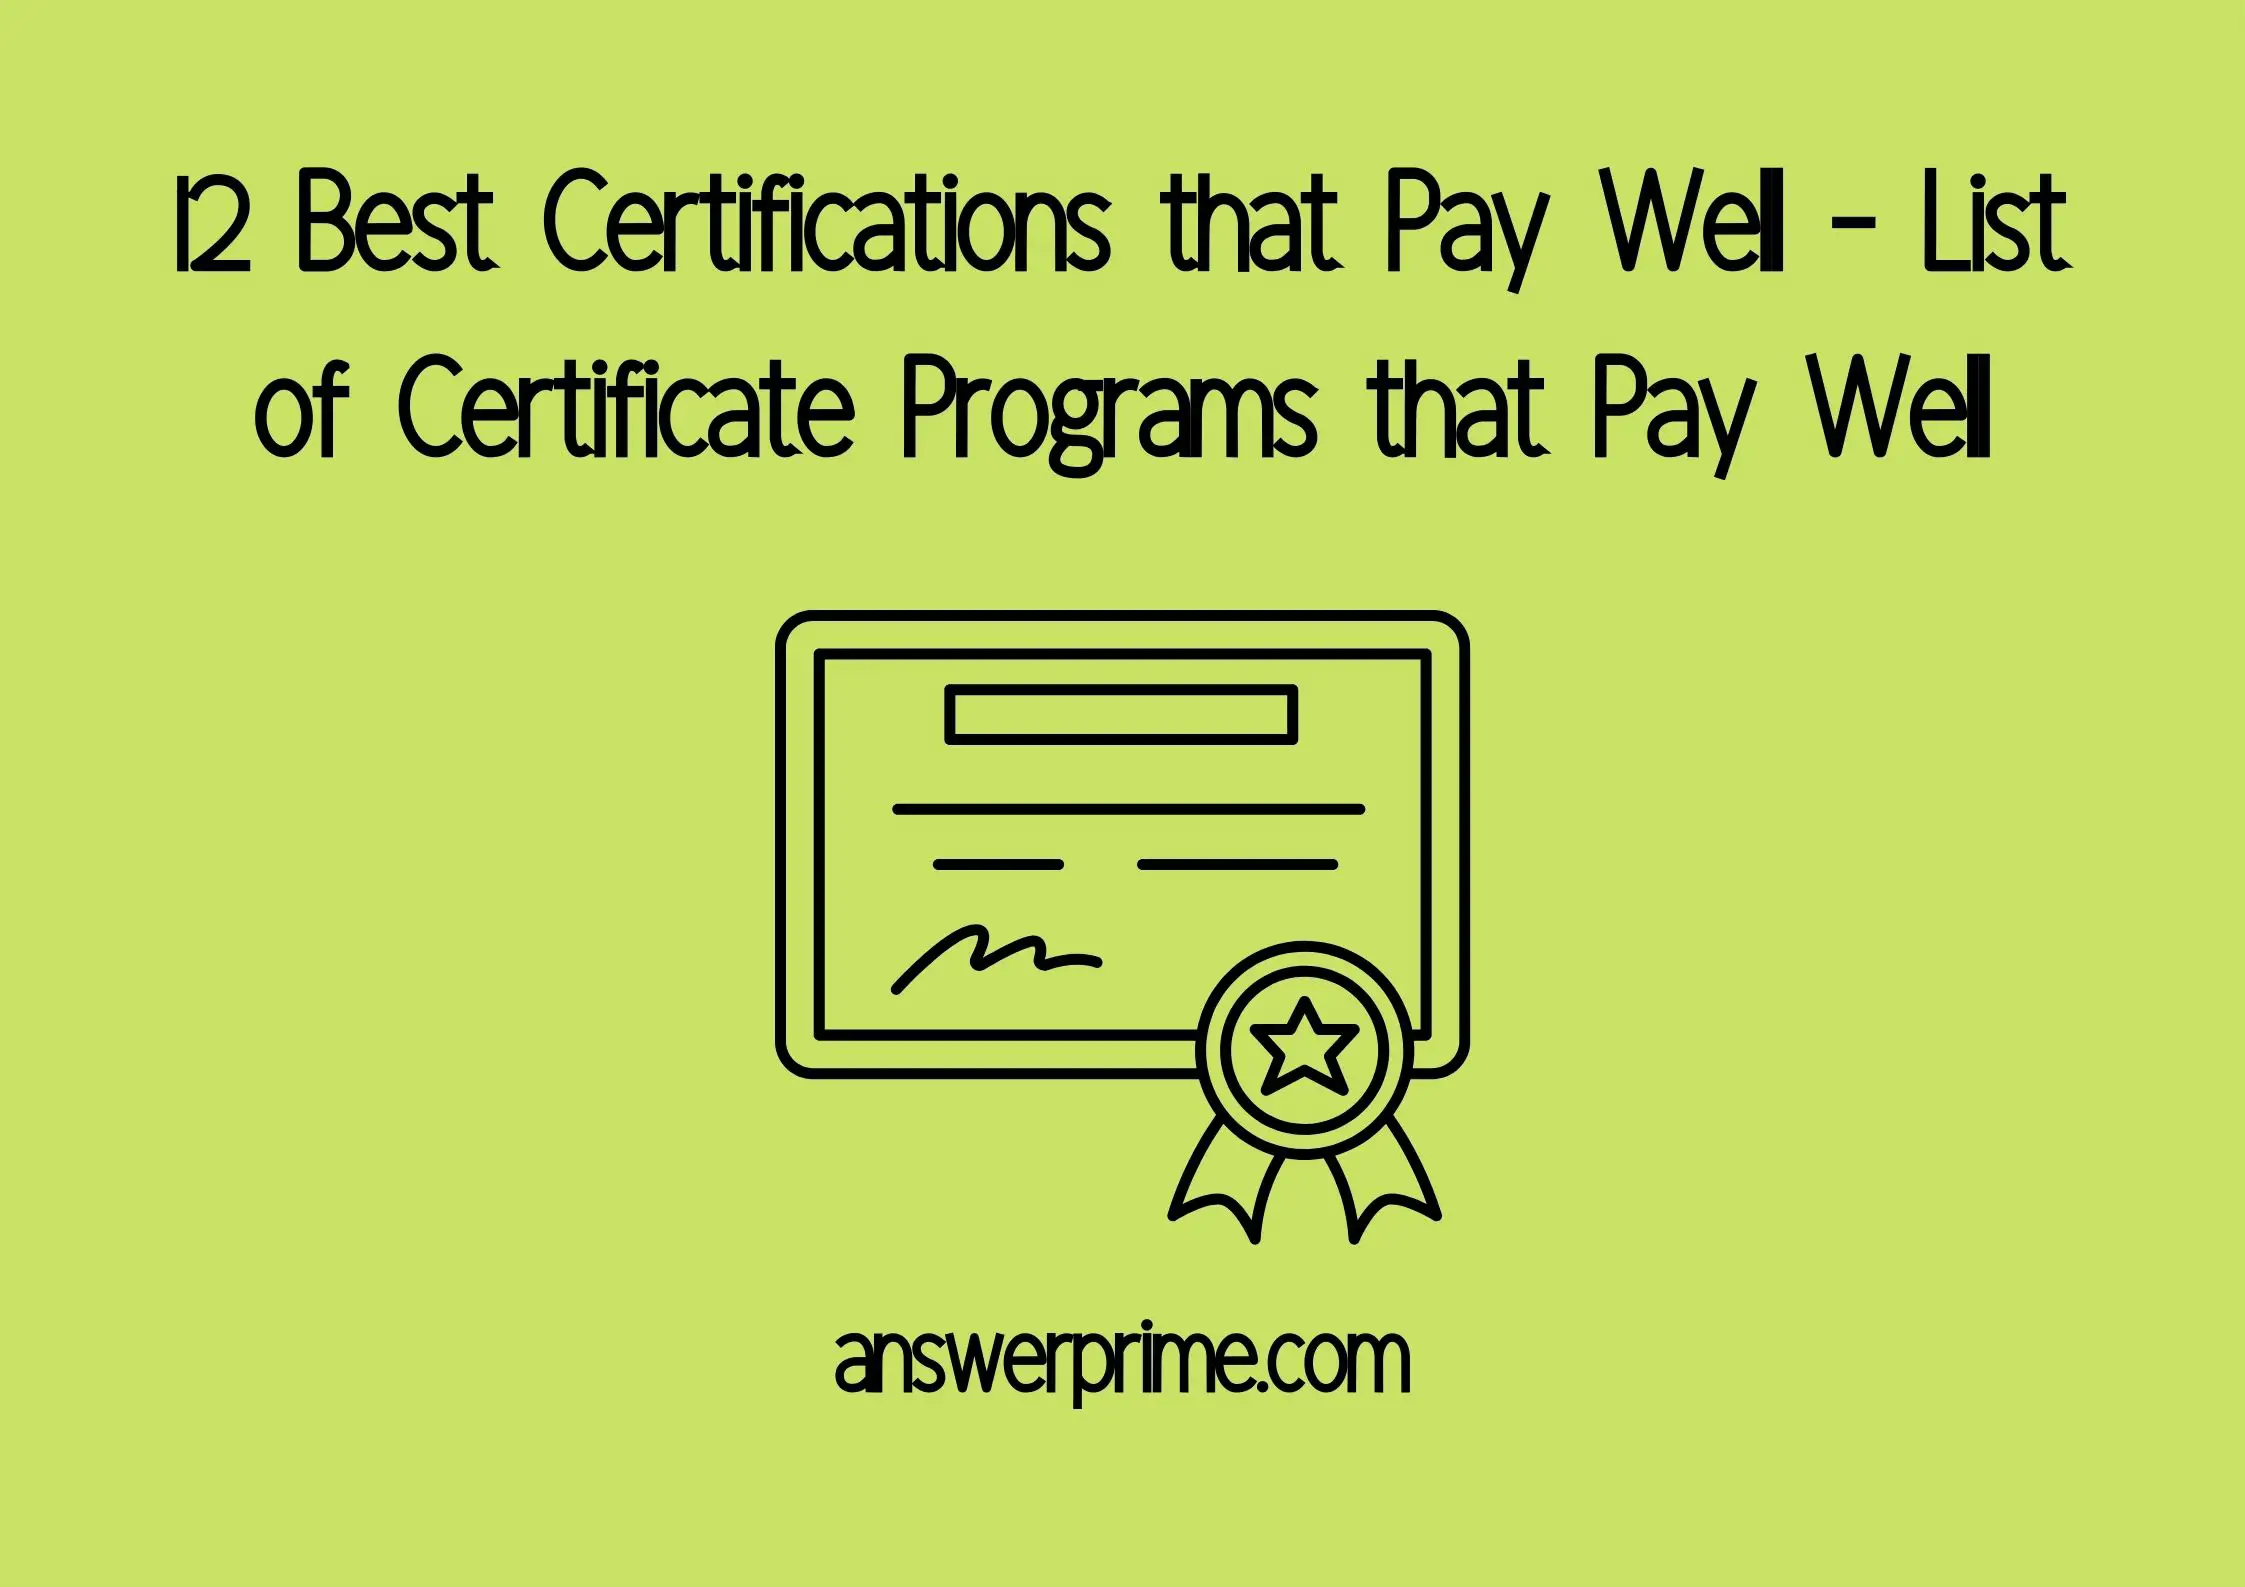 12 Best Certifications that Pay Well - List of Certificate Programs that Pay Well